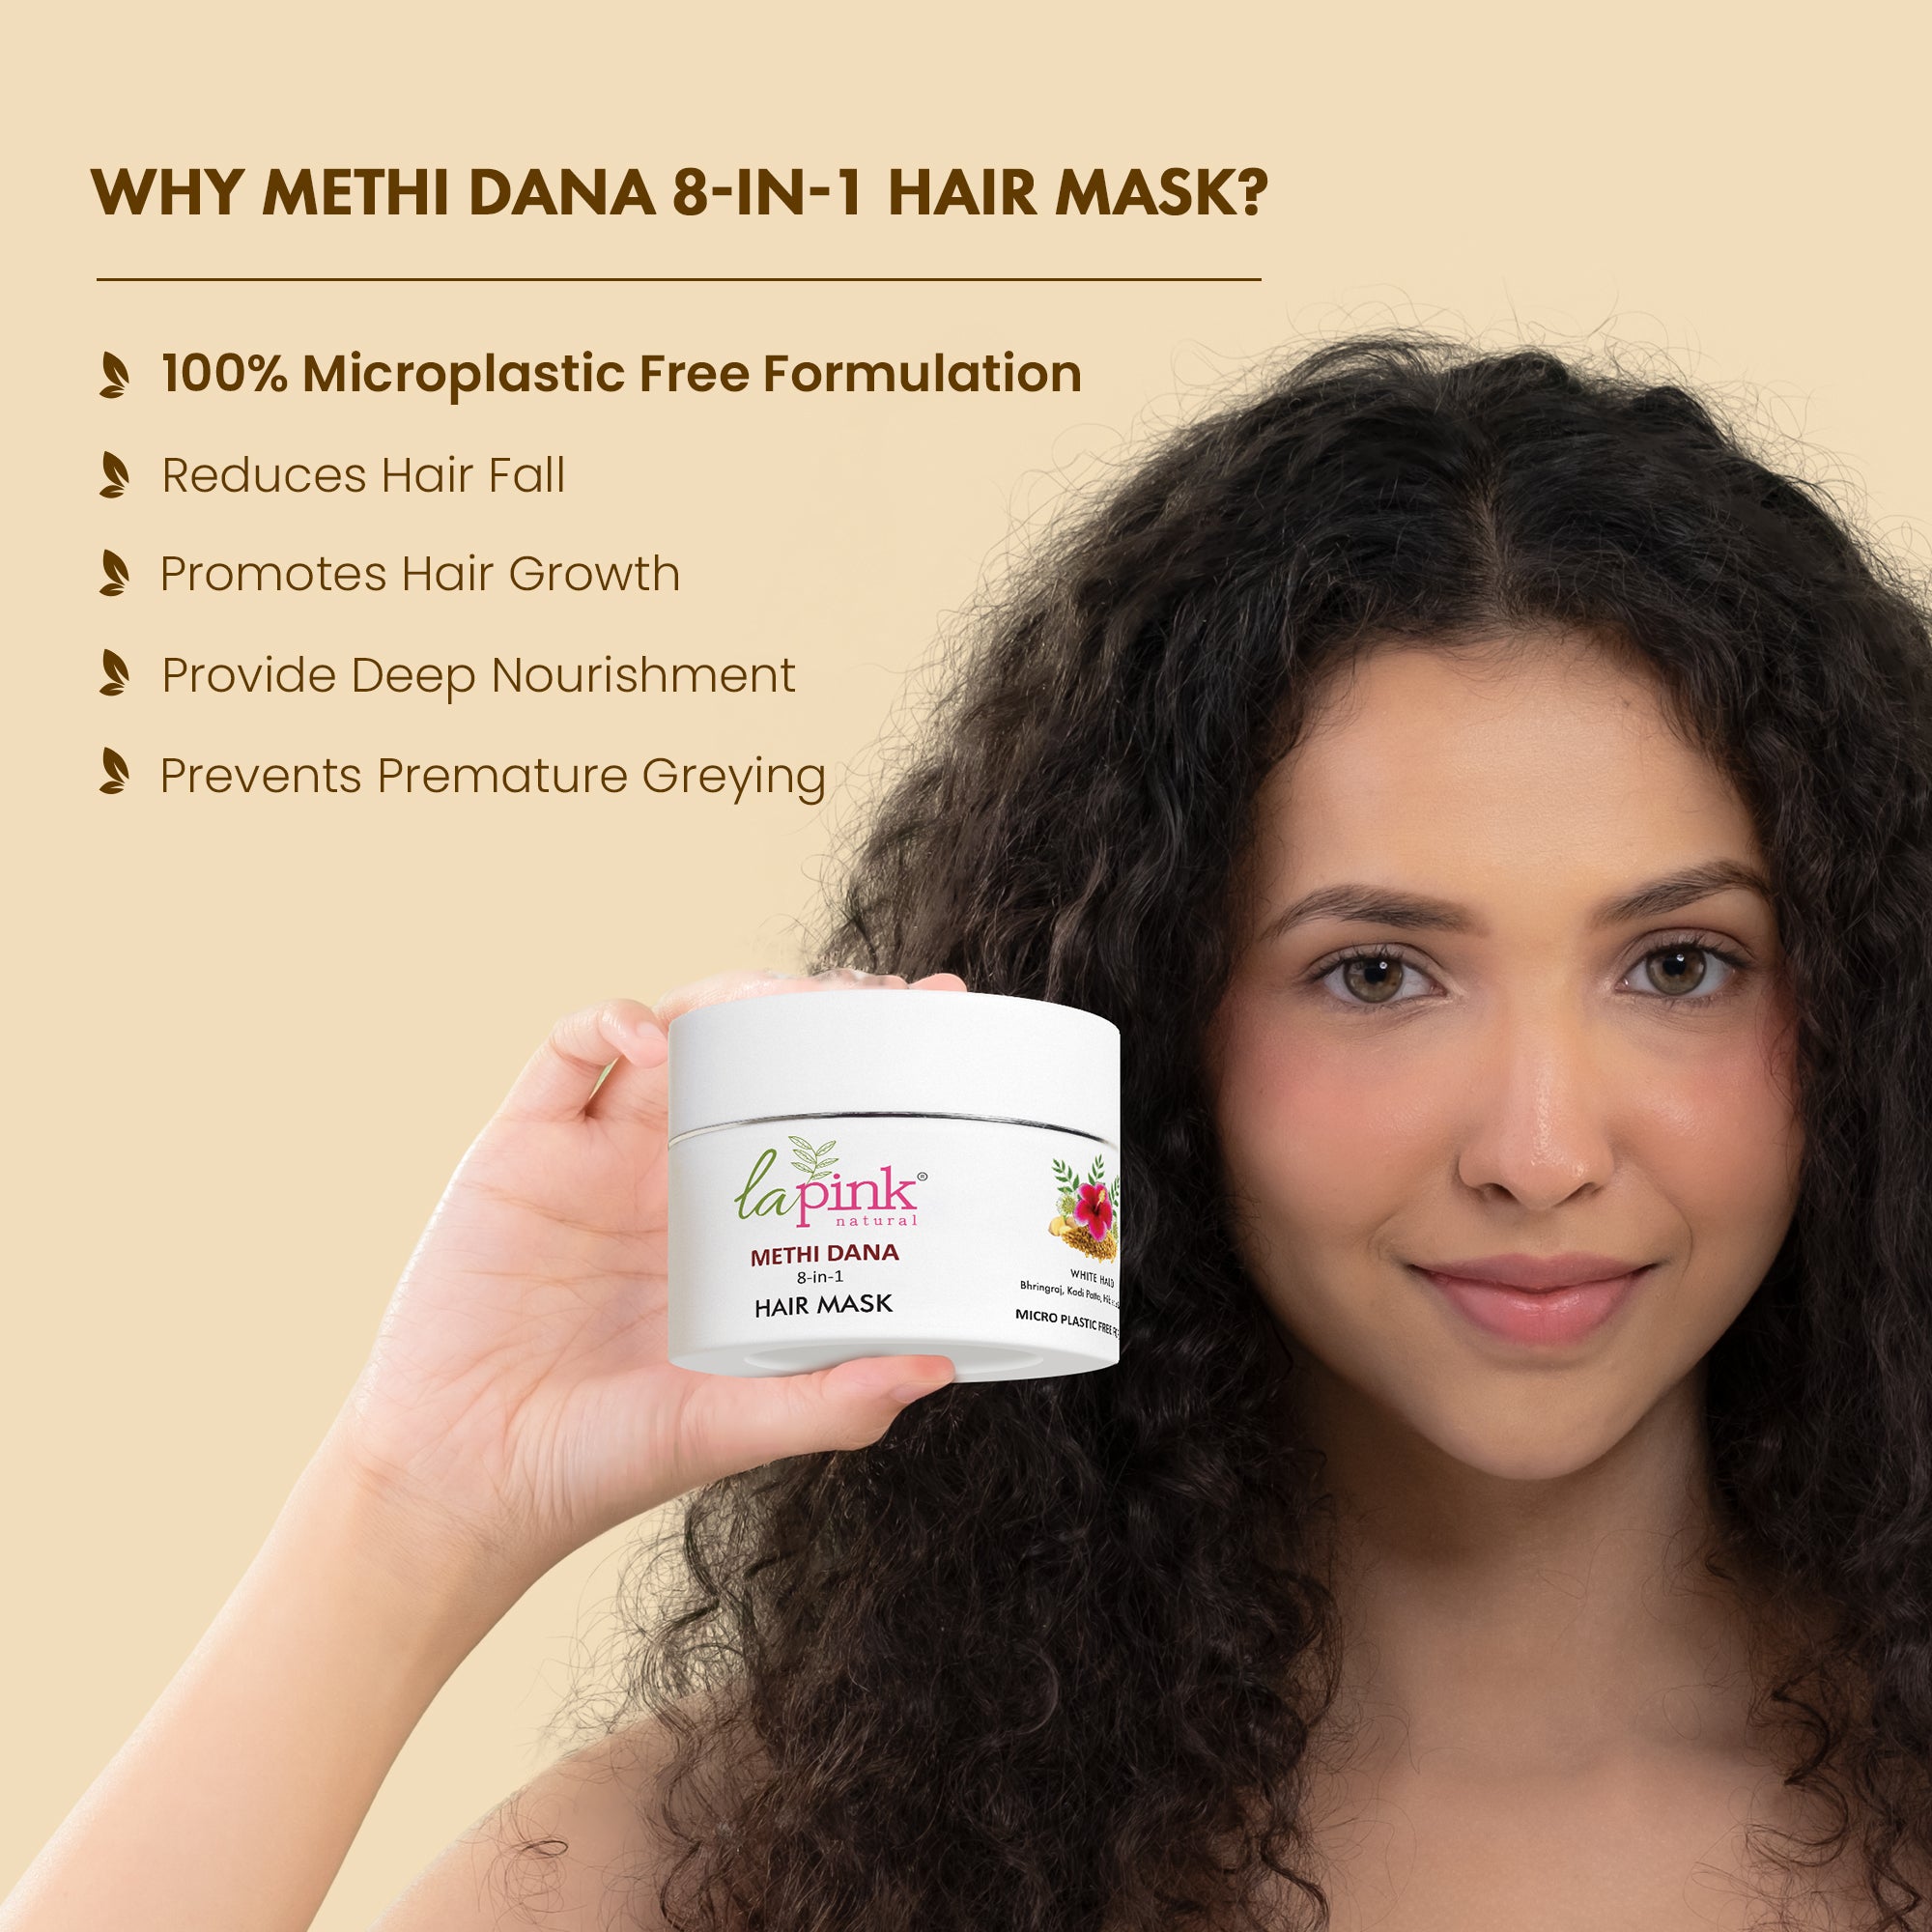 Methi Dana 8-in-1 Hair Mask with White Haldi for Hair Fall Control &amp; promoting Hair Growth